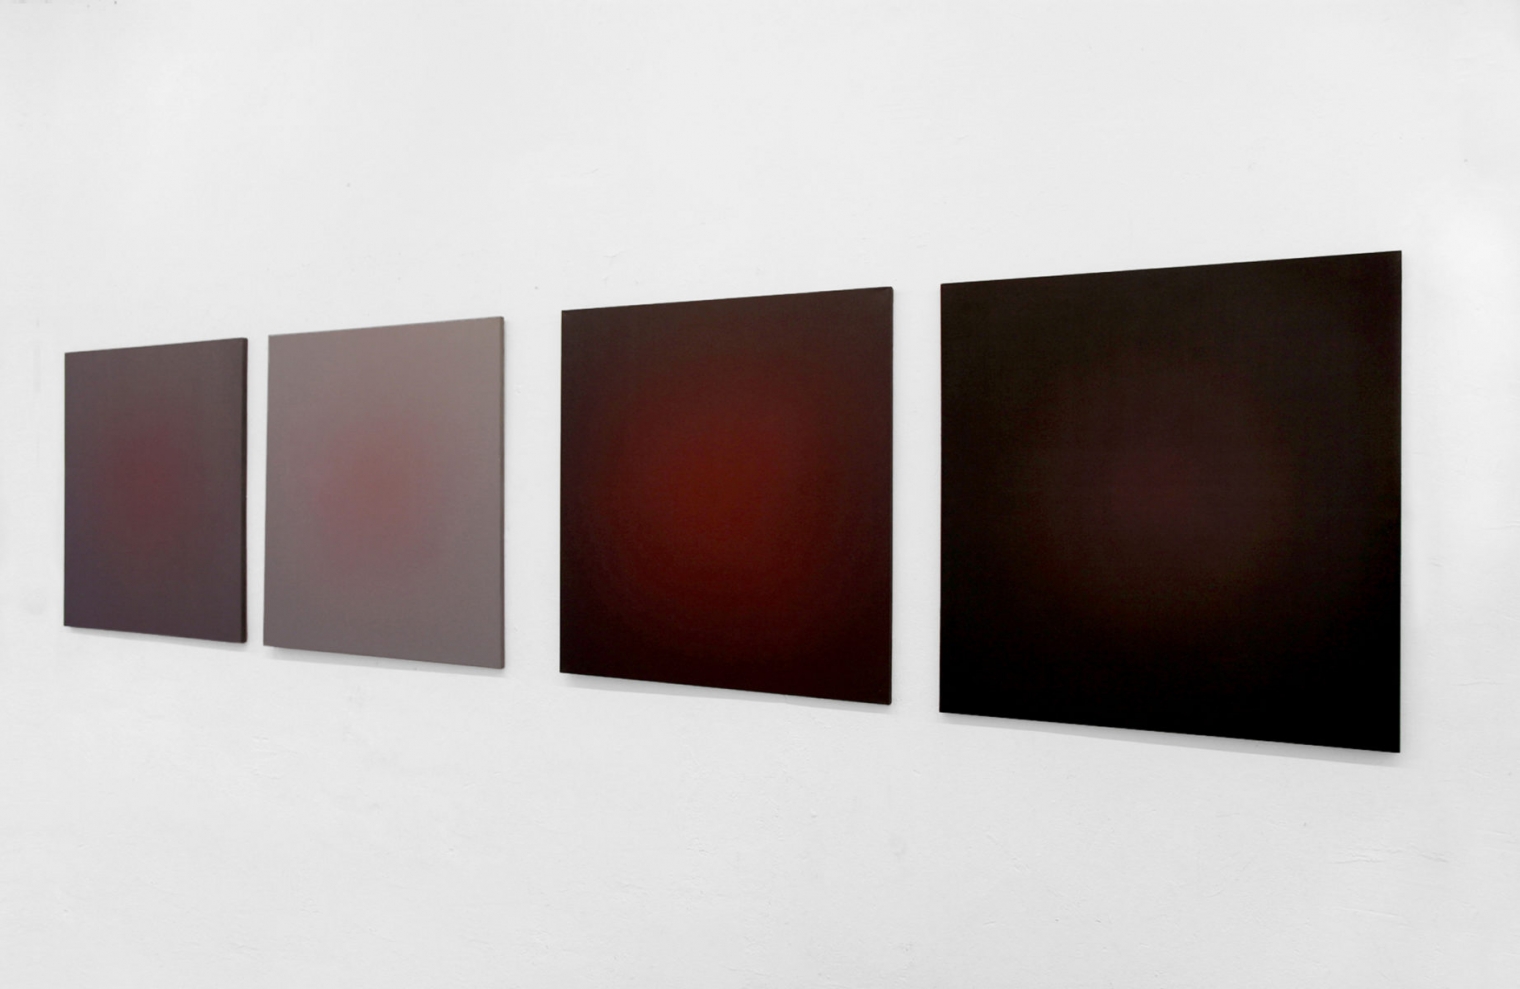 IMPLOSION Material: oil on canvas; Dimension: each 120 x 110 cm; Date: 2013